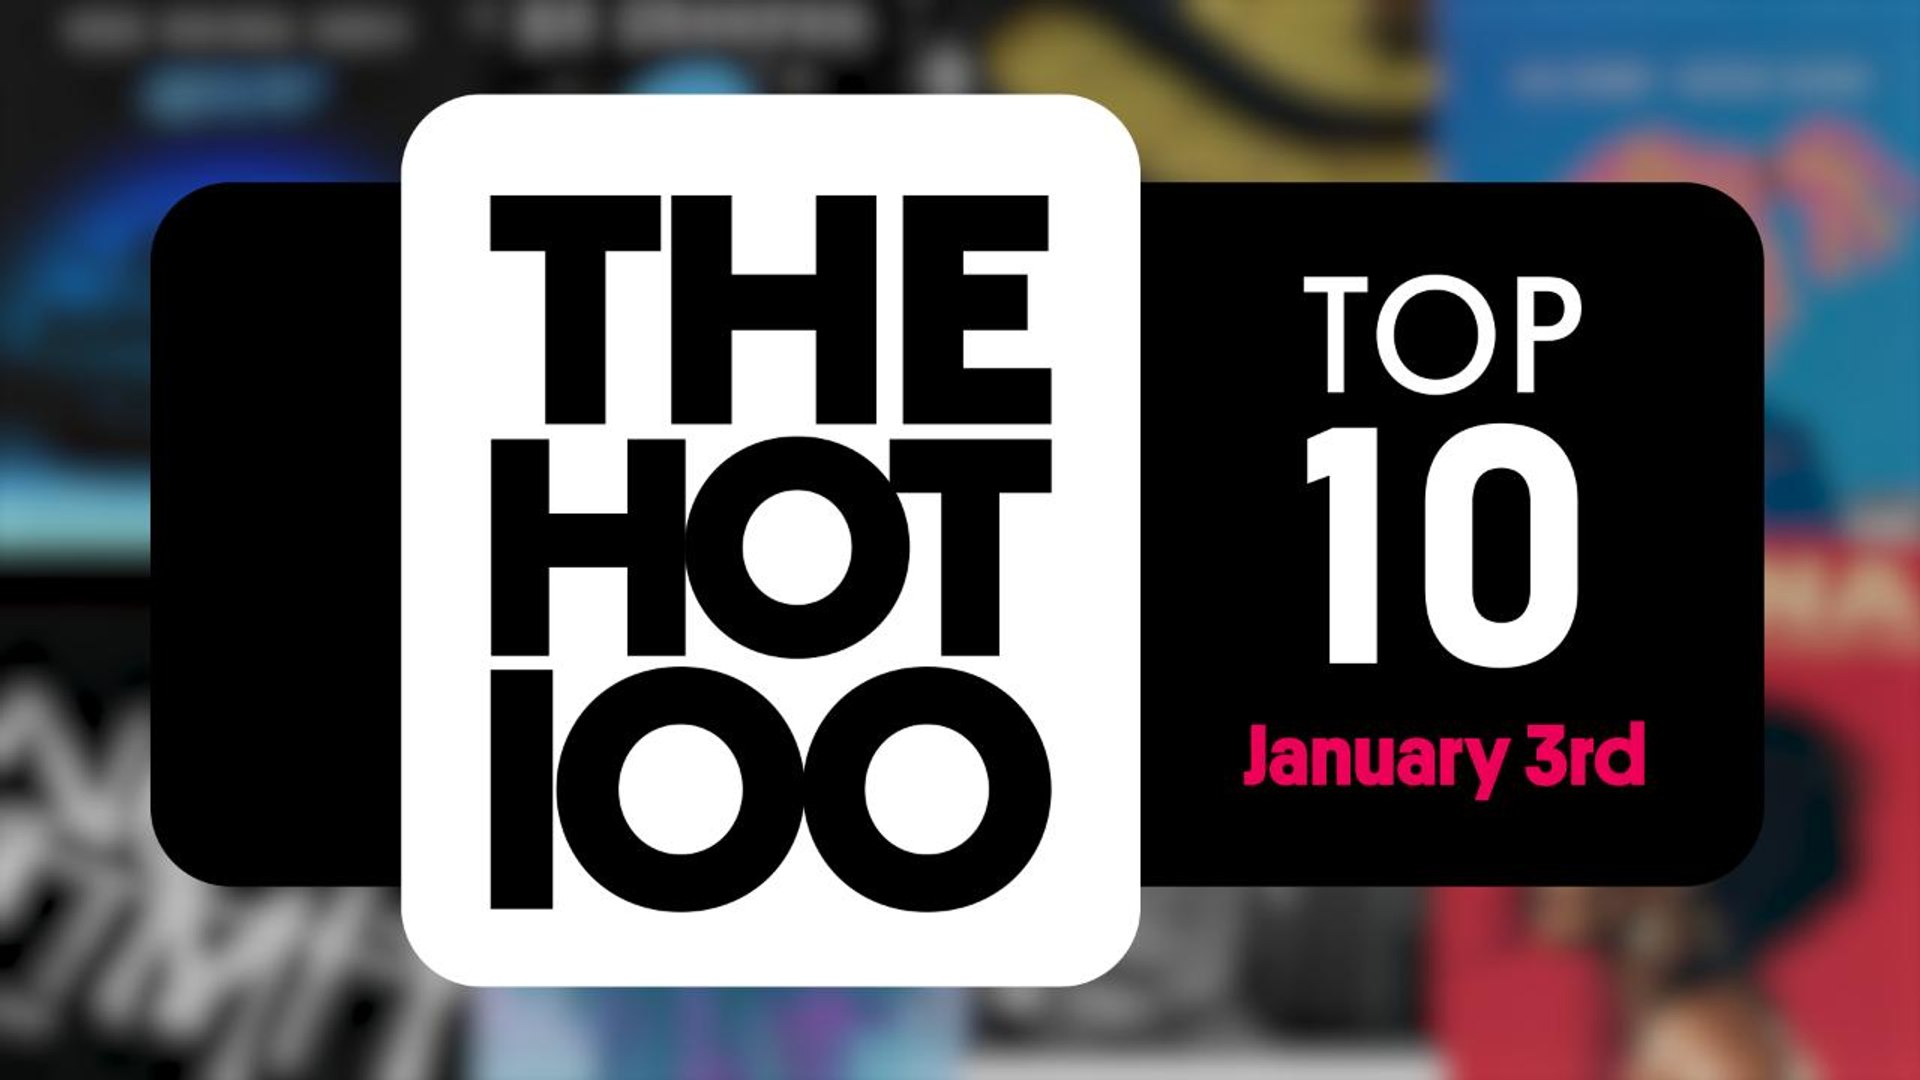 Early Release! Billboard Hot 100 Top 10 January 3rd 2018 Countdown | Official